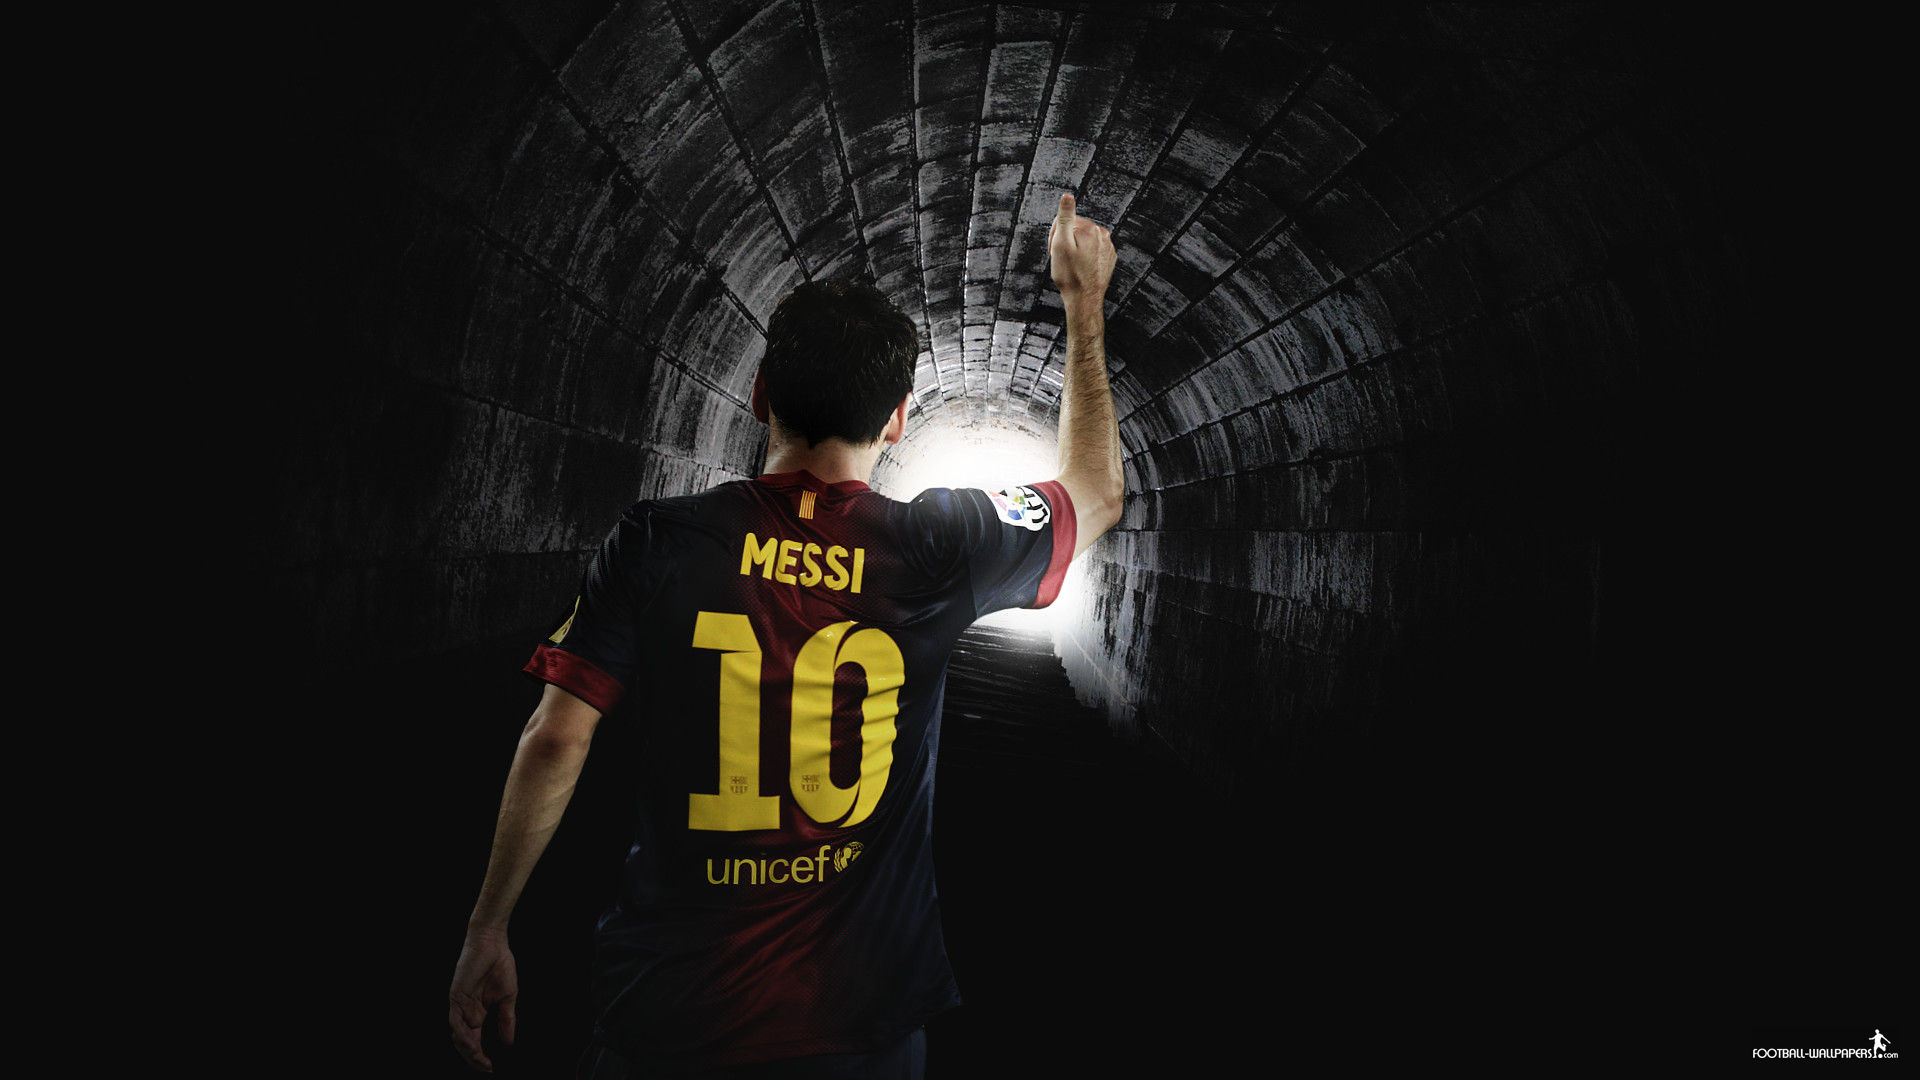 Messi Football Player Wallpapers Players Teams Leagues 1920x1080